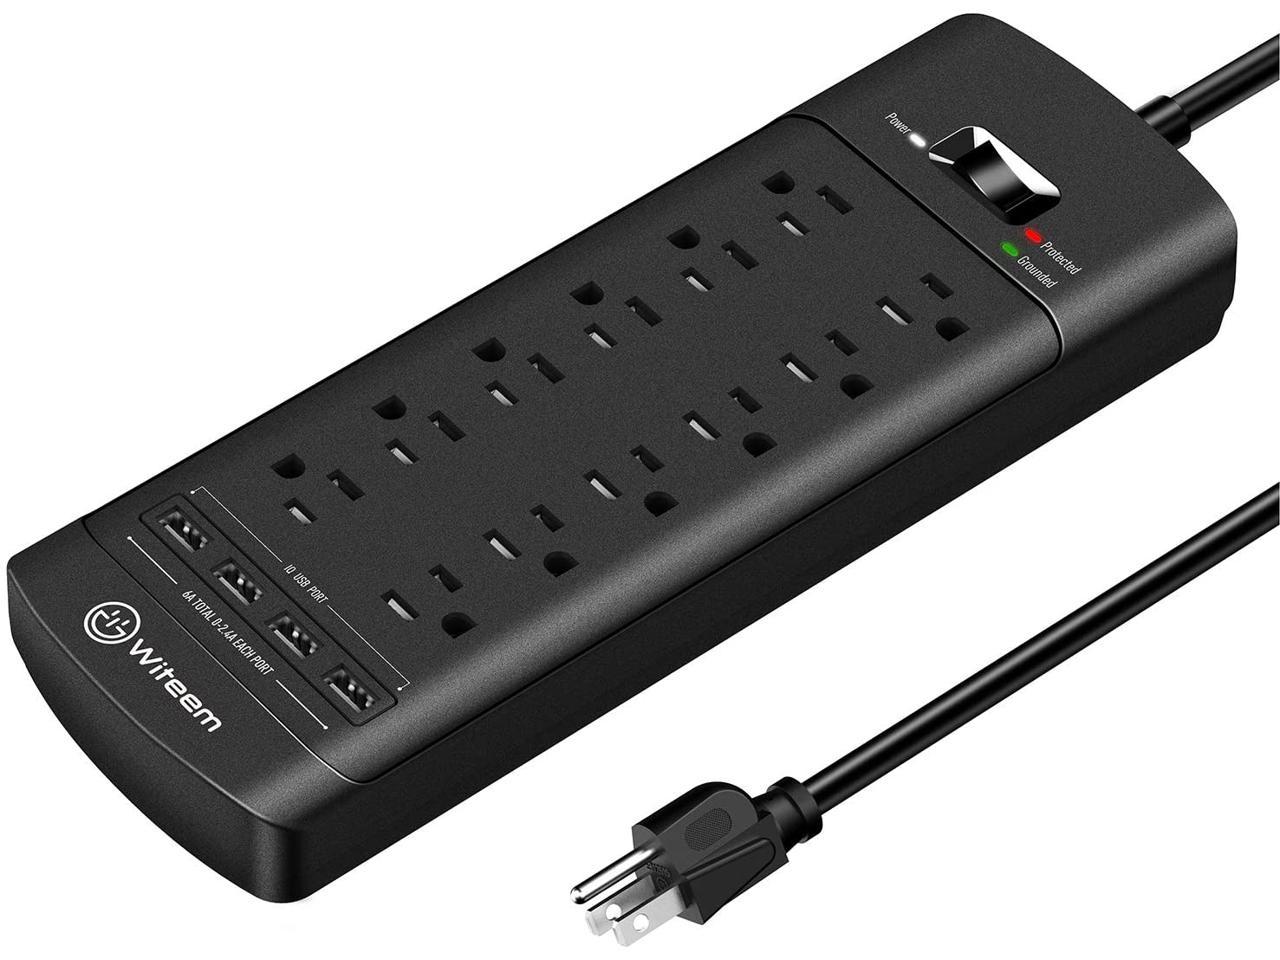 1875W/15A 4360 Joules Witeem 12 Outlets Power Strip and 4 Smart USB Charging Ports 6 Feet Heavy Duty Extension Cord Surge Protector with USB ETL Listed 5V/3.4A Black Flat Plug 